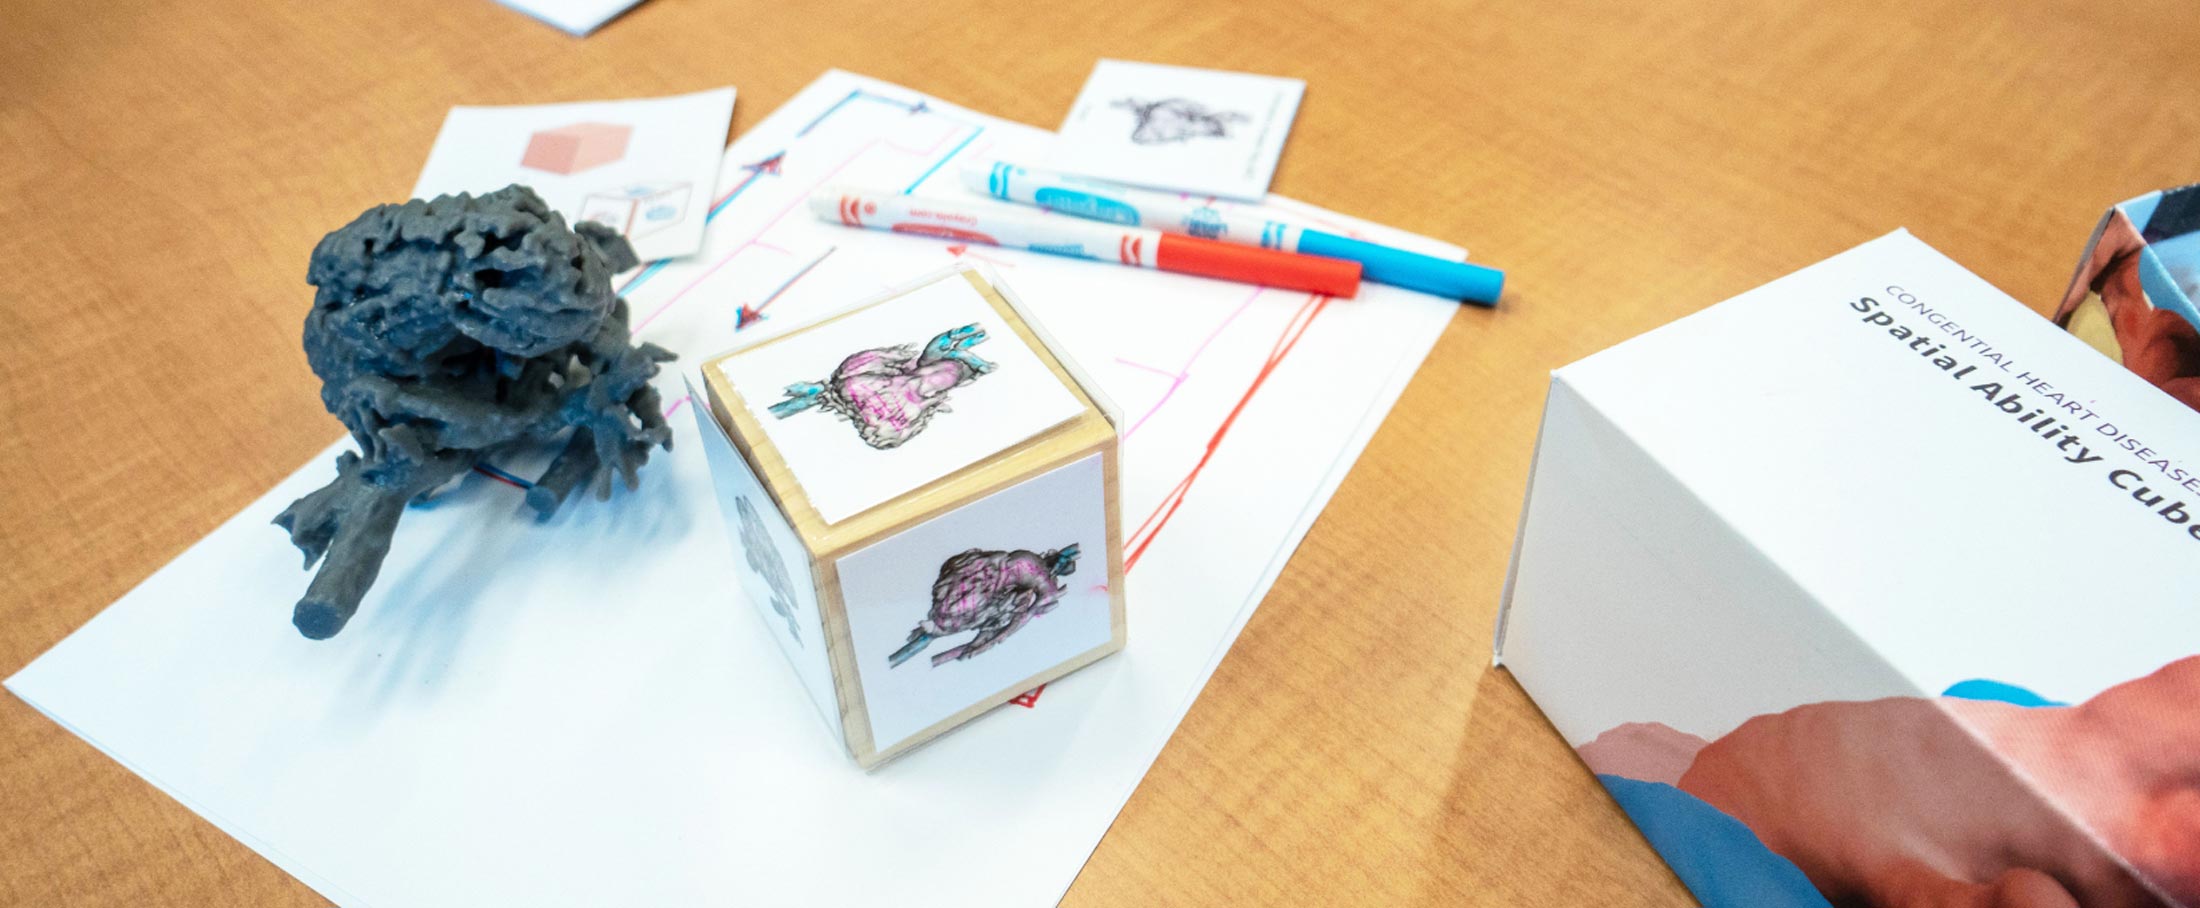 The cube and heart model sitting on a table with markers and notes